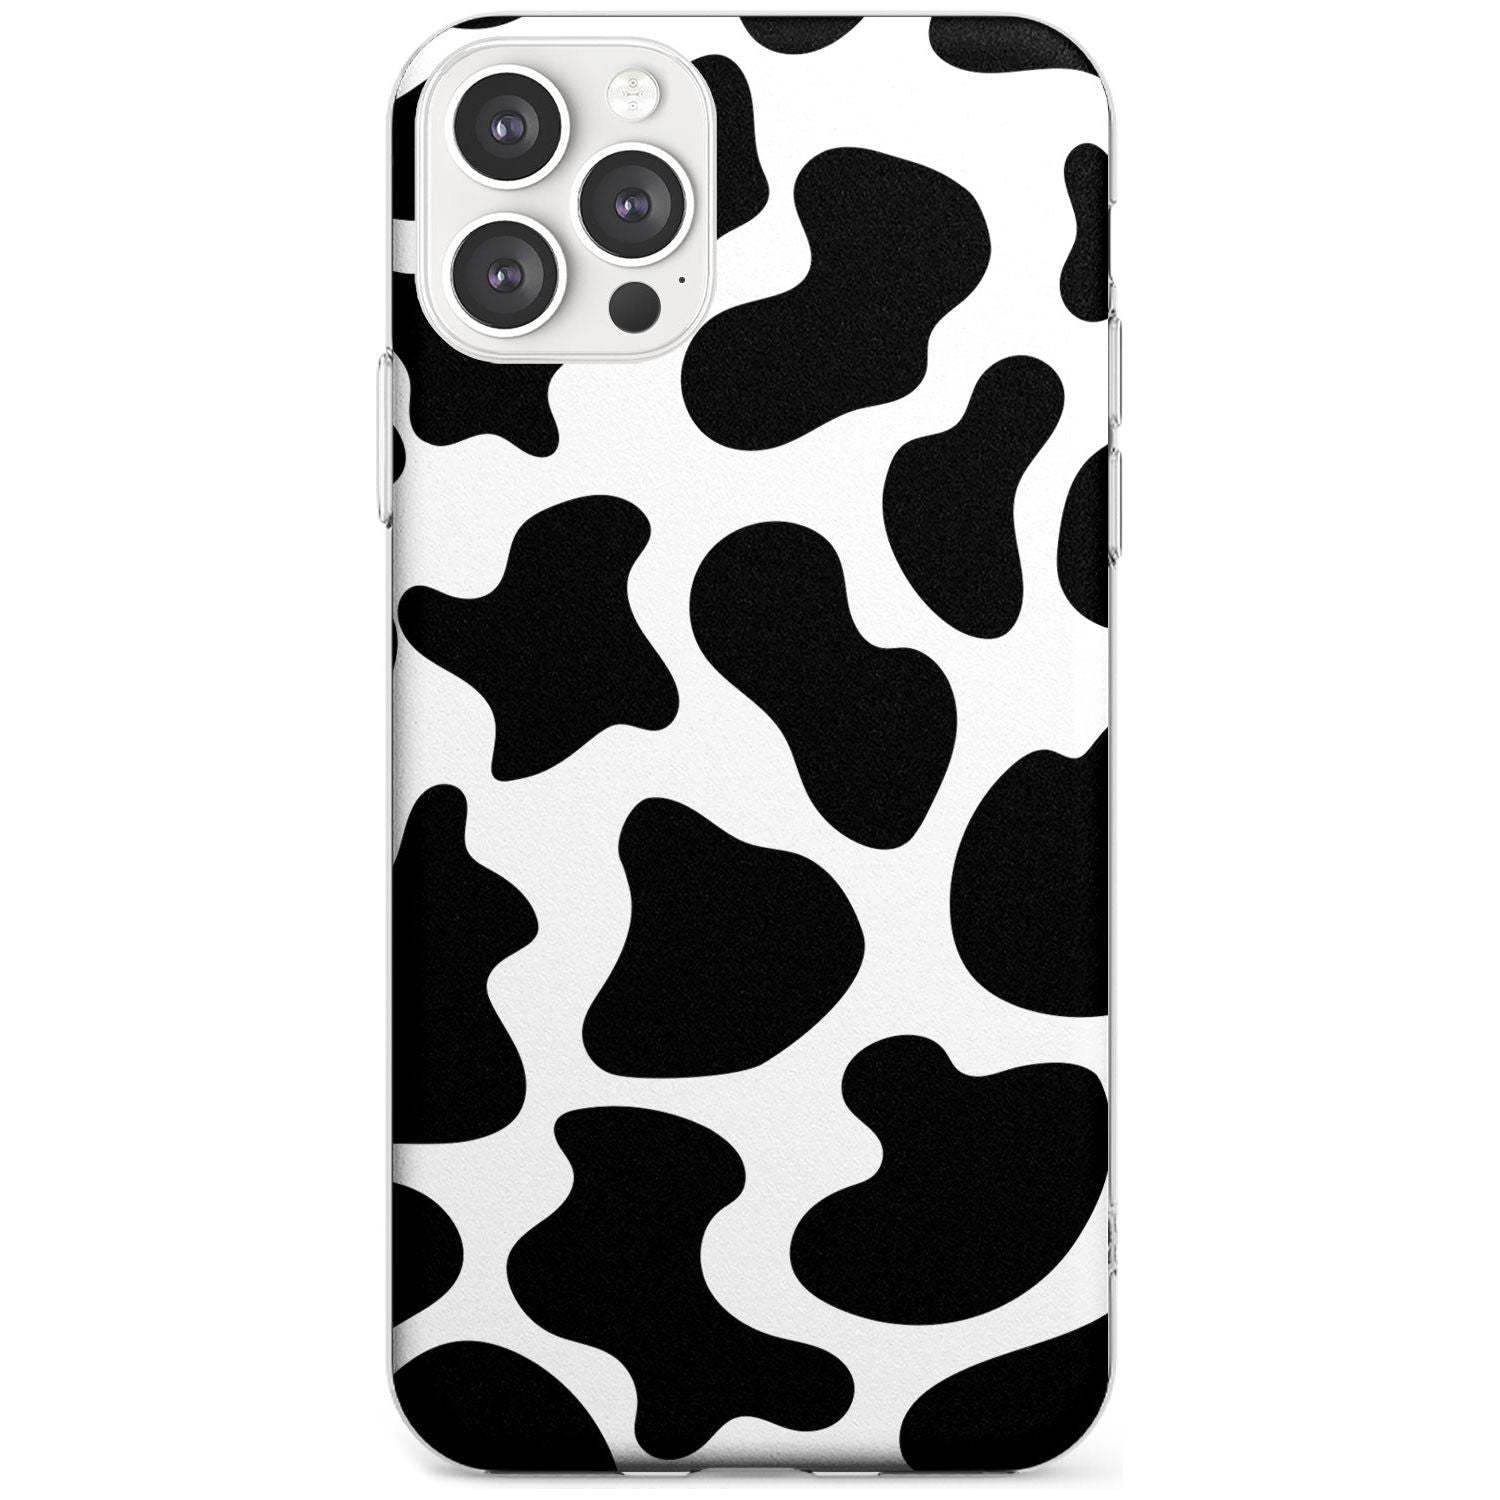 Cow Print Black Impact Phone Case for iPhone 11 Pro Max